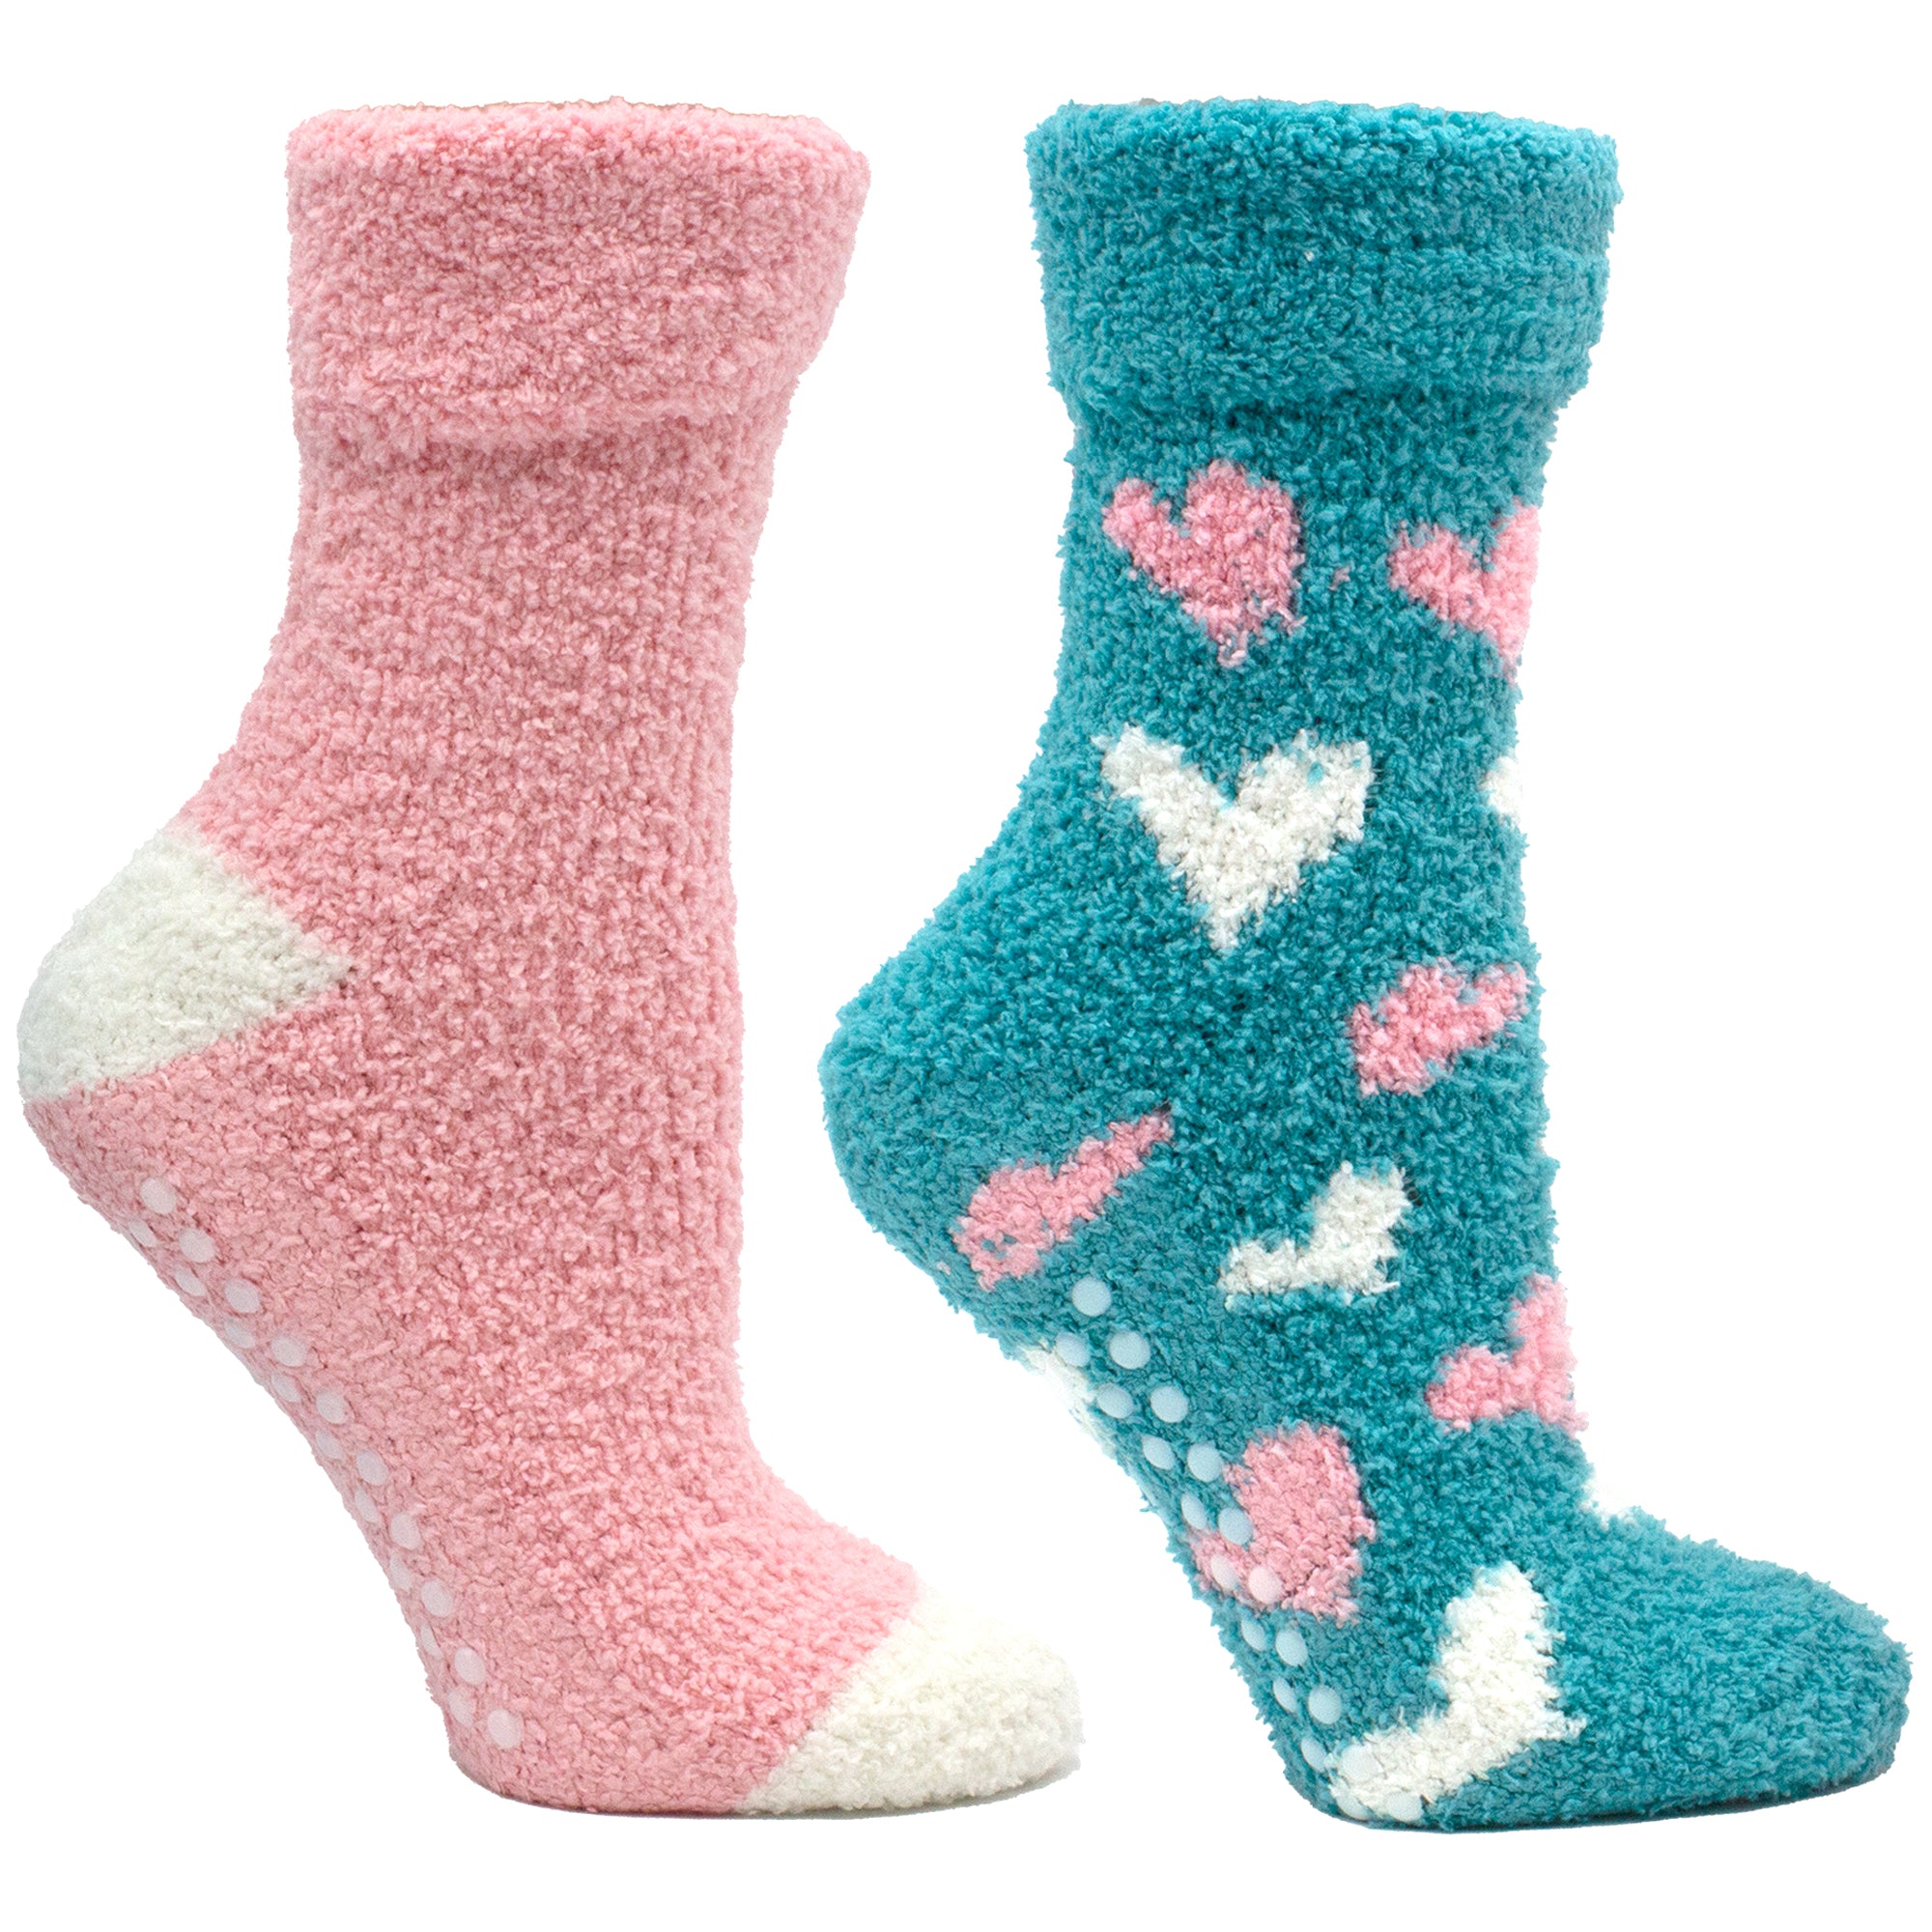 2 Pairs - Non-Skid Fuzzy Lavender Infused Cloud Slipper Socks with Lavender Sachet